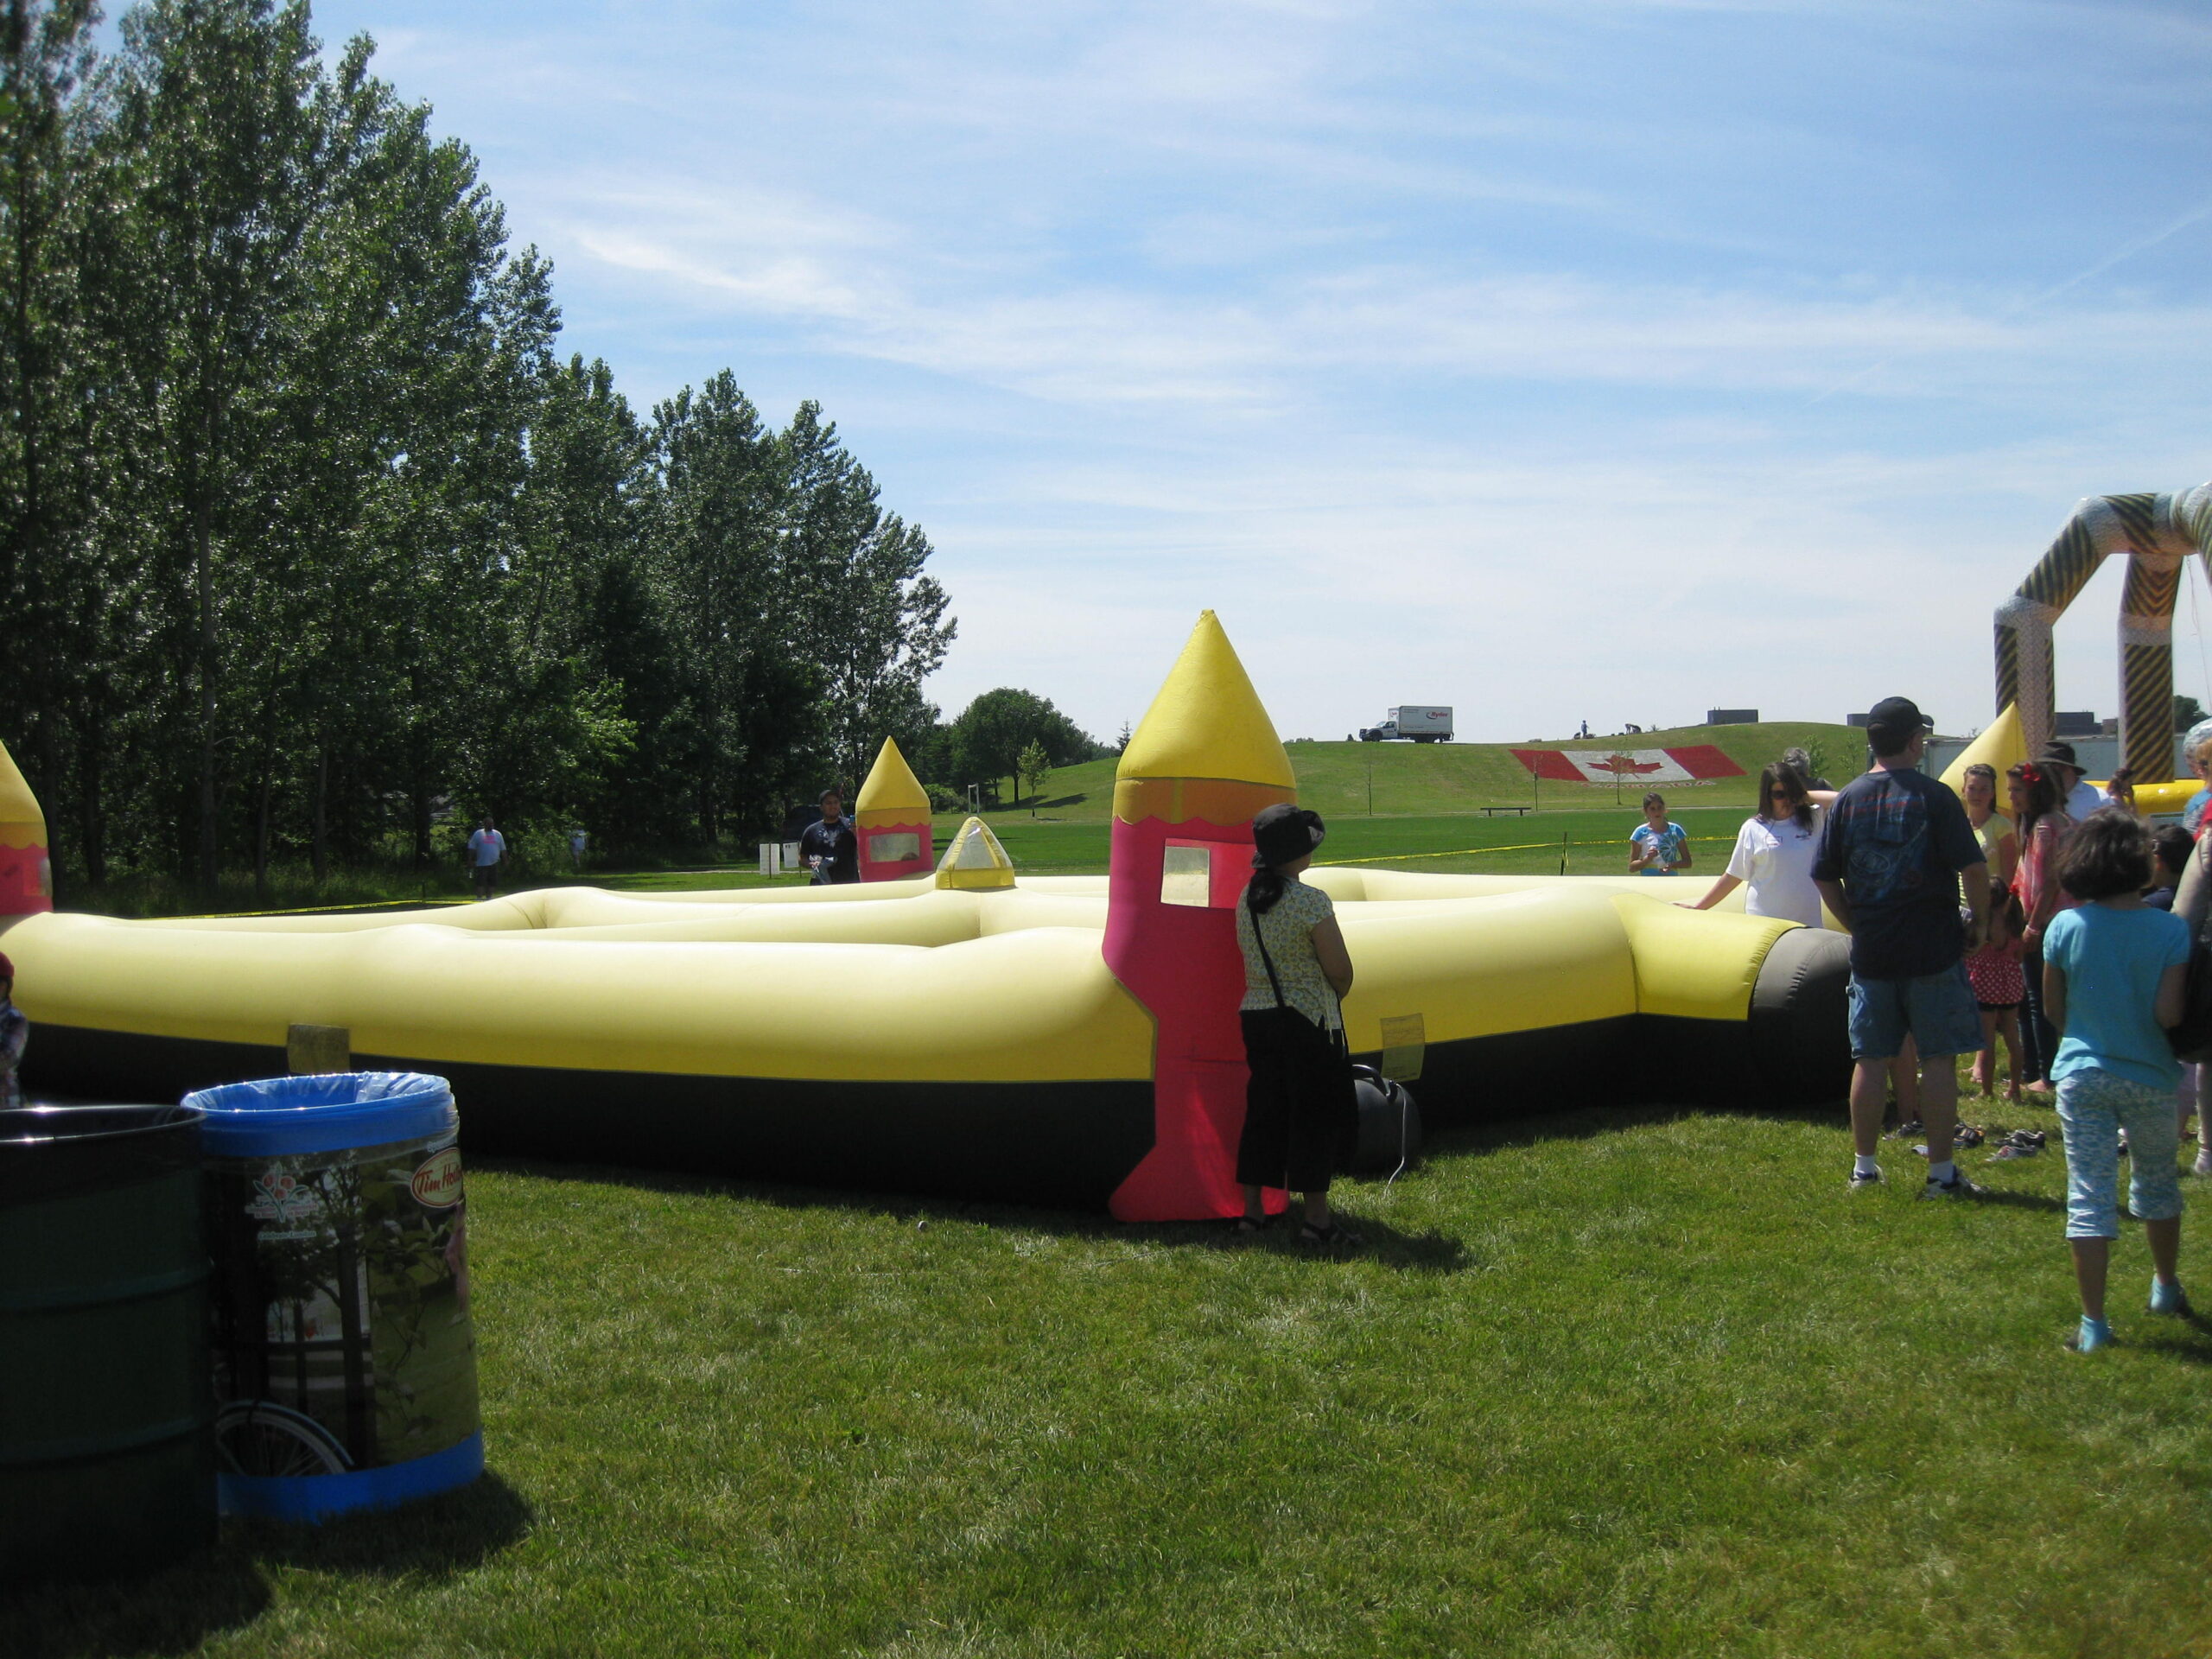 Giant Yellow Maze inflatable maze at outdoor event